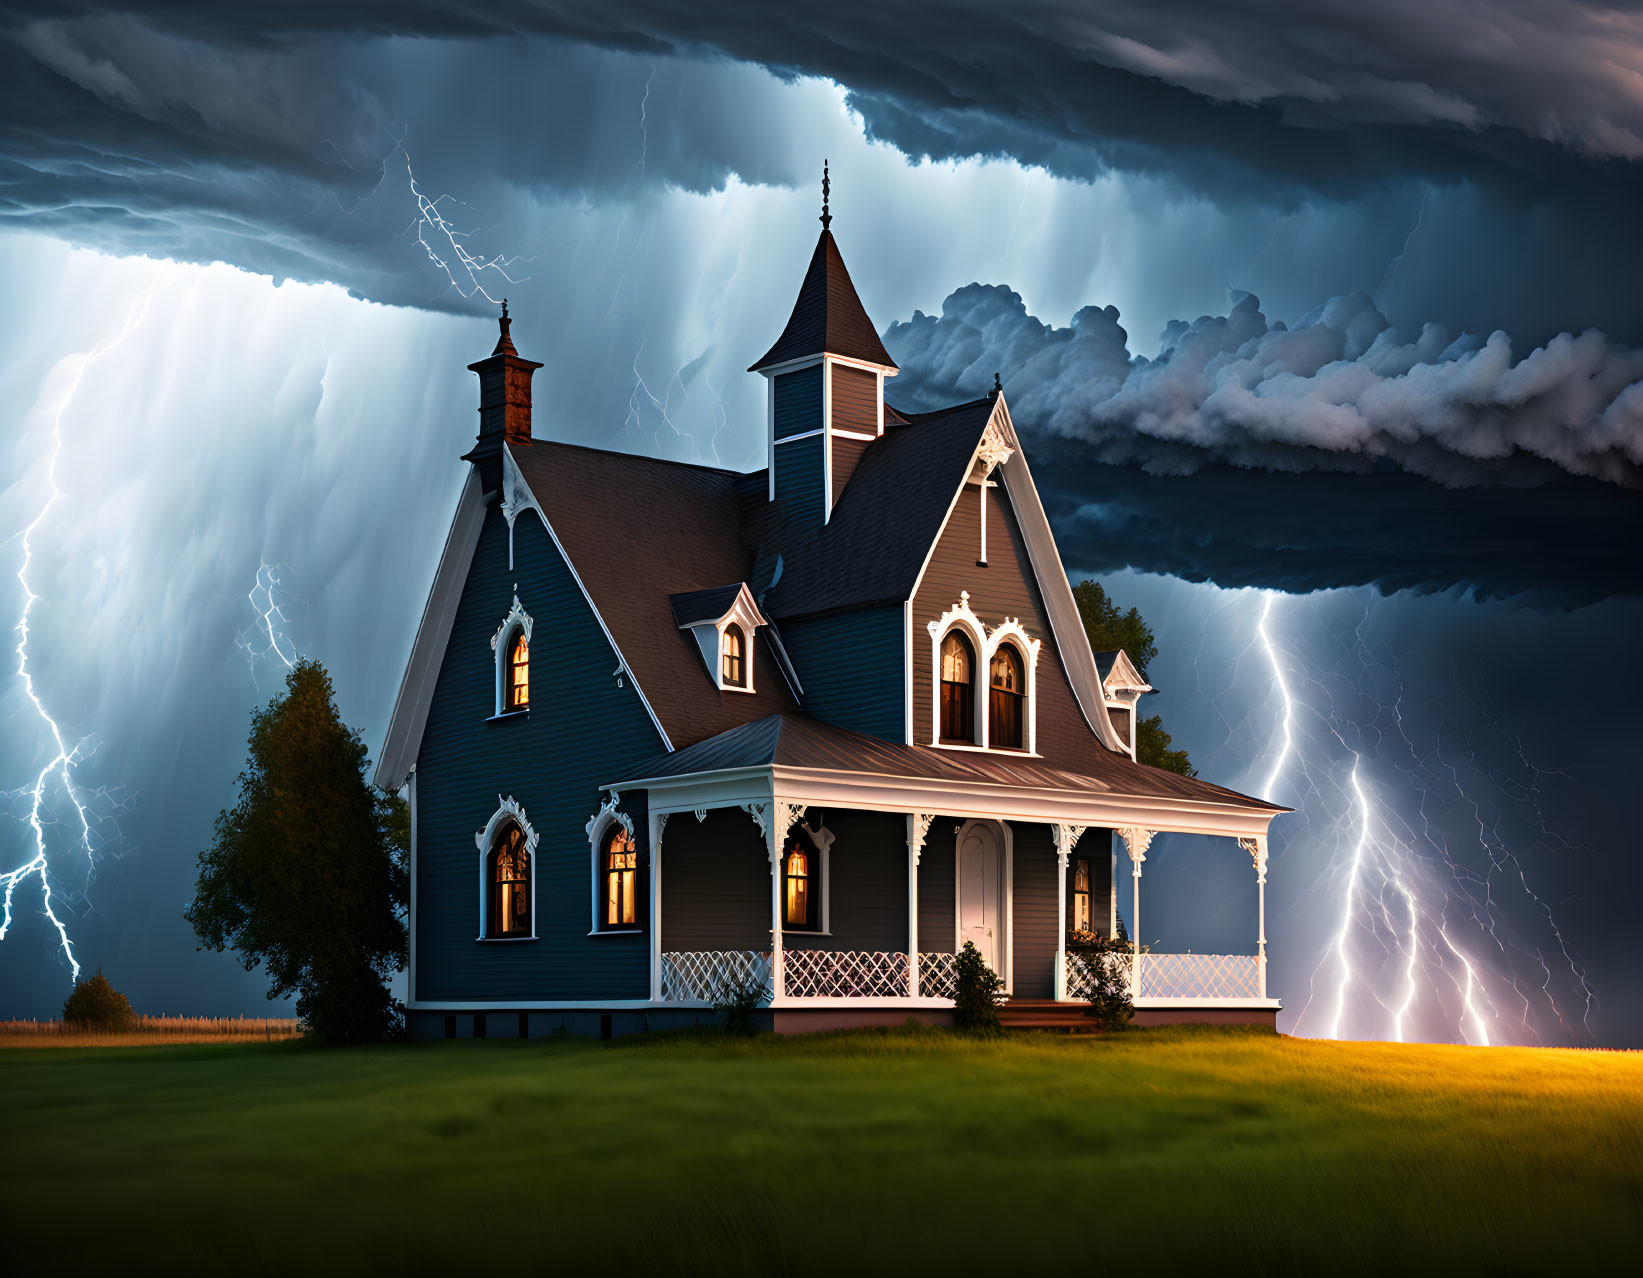 Victorian-style house with porch under dramatic sky with lightning bolts